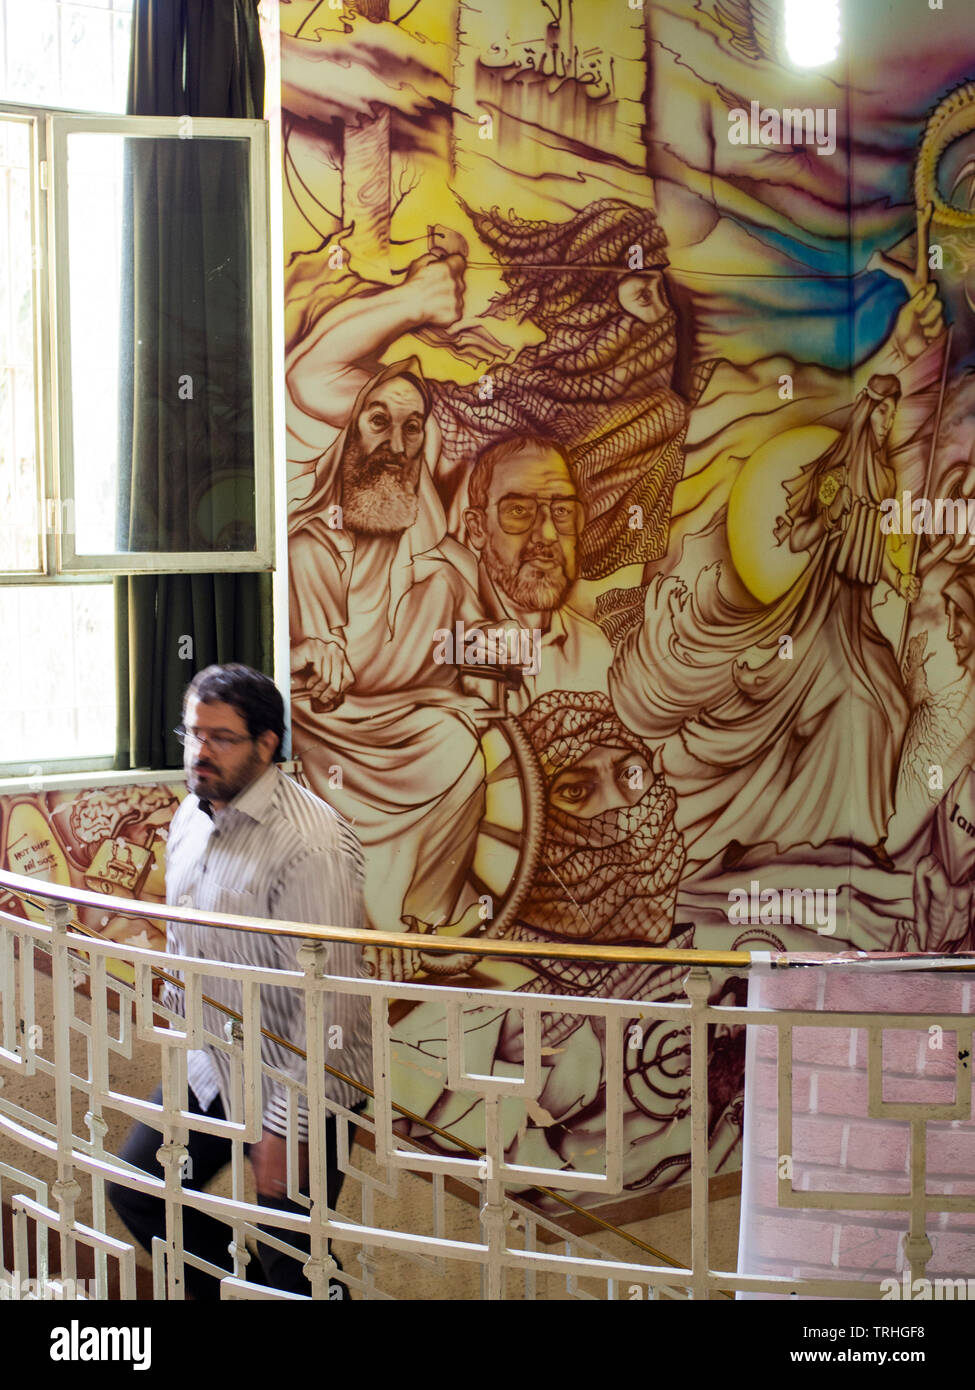 Murals inside the Museum of Anti- Arrogance, which is located in the former American embassy in Tehran, Iran. Stock Photo